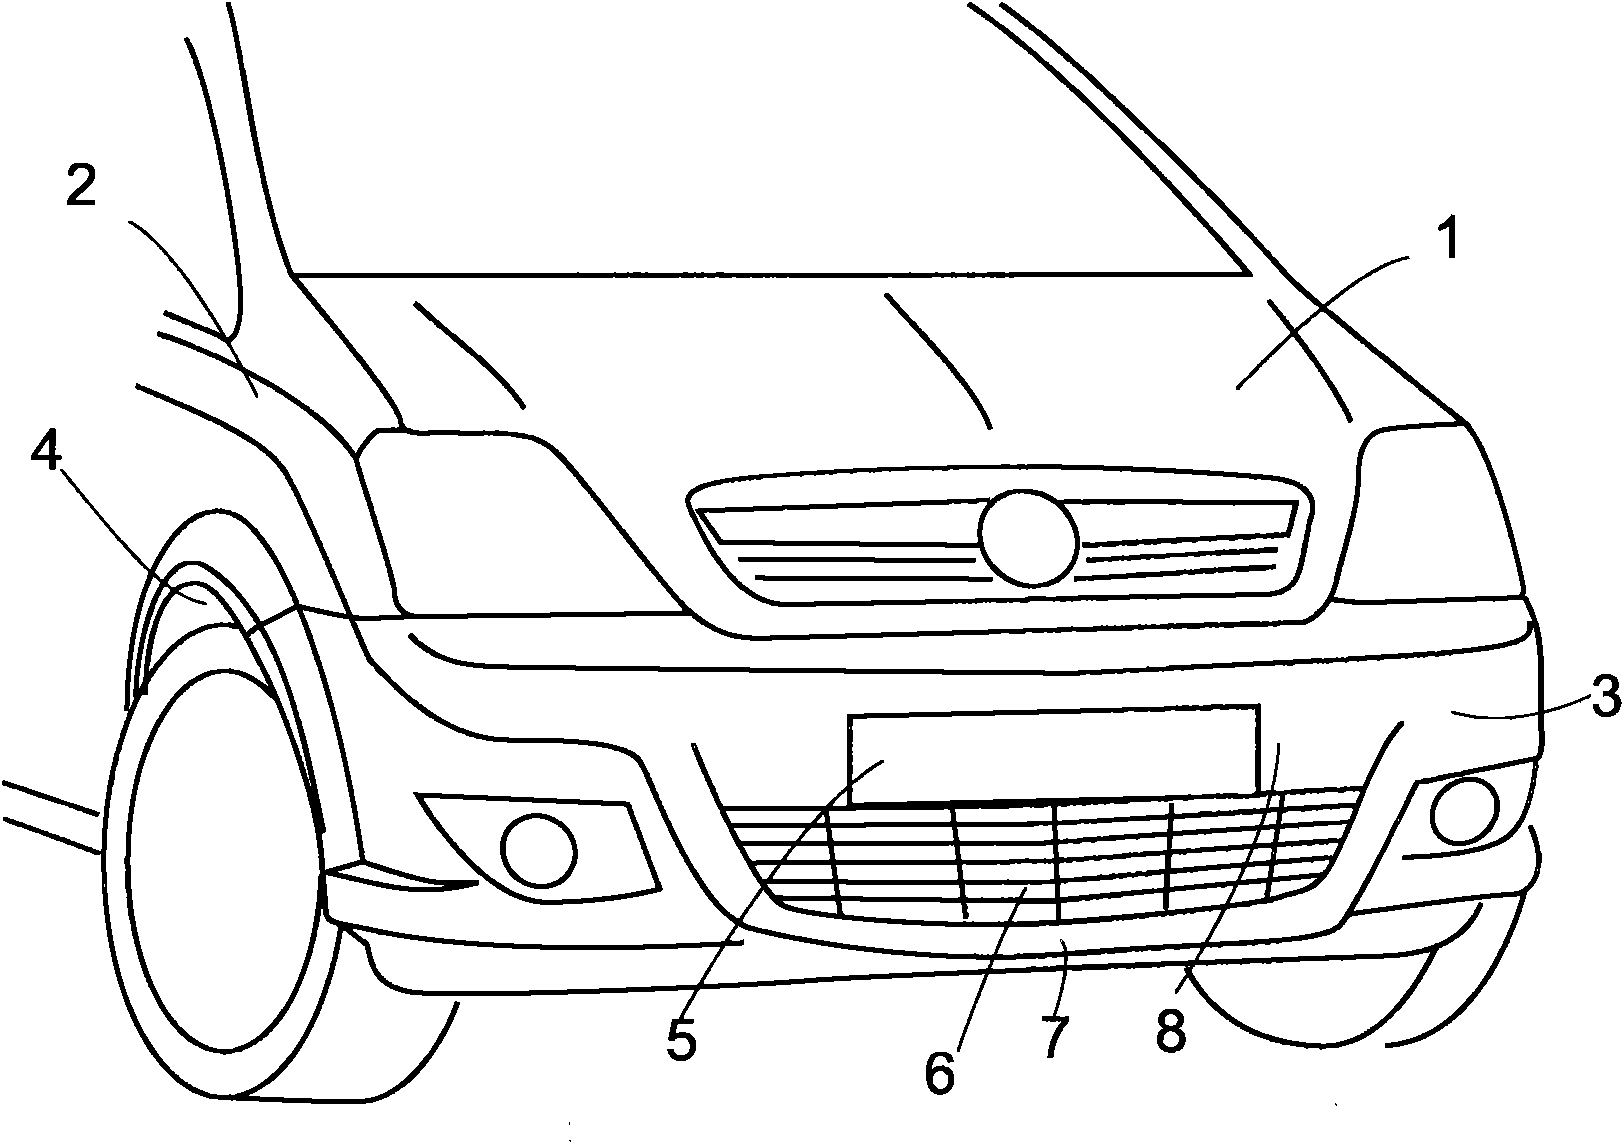 Front section for a motor vehicle body